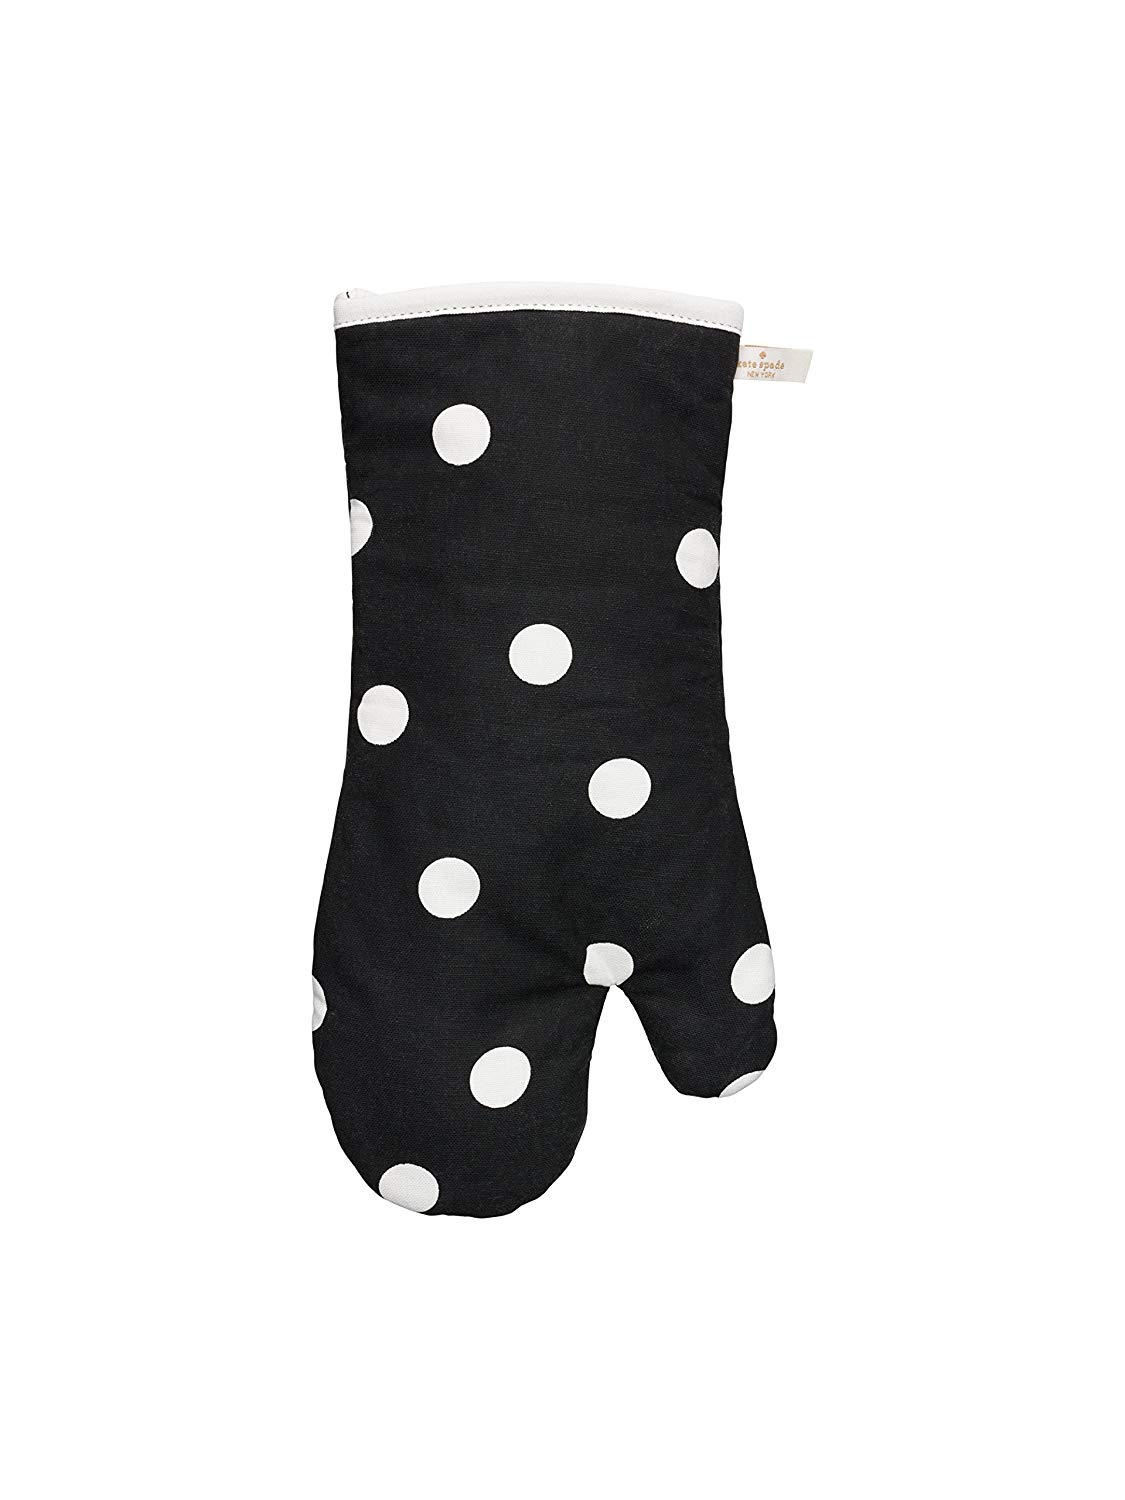 HomeSense Winners FabFinds on Instagram: Kate Spade polka dots oven mitts.  Matches perfectly with the kitchen towels that are currently selling at  Costco! $12.99 📍Winners @ Dundas & Winston Churchill